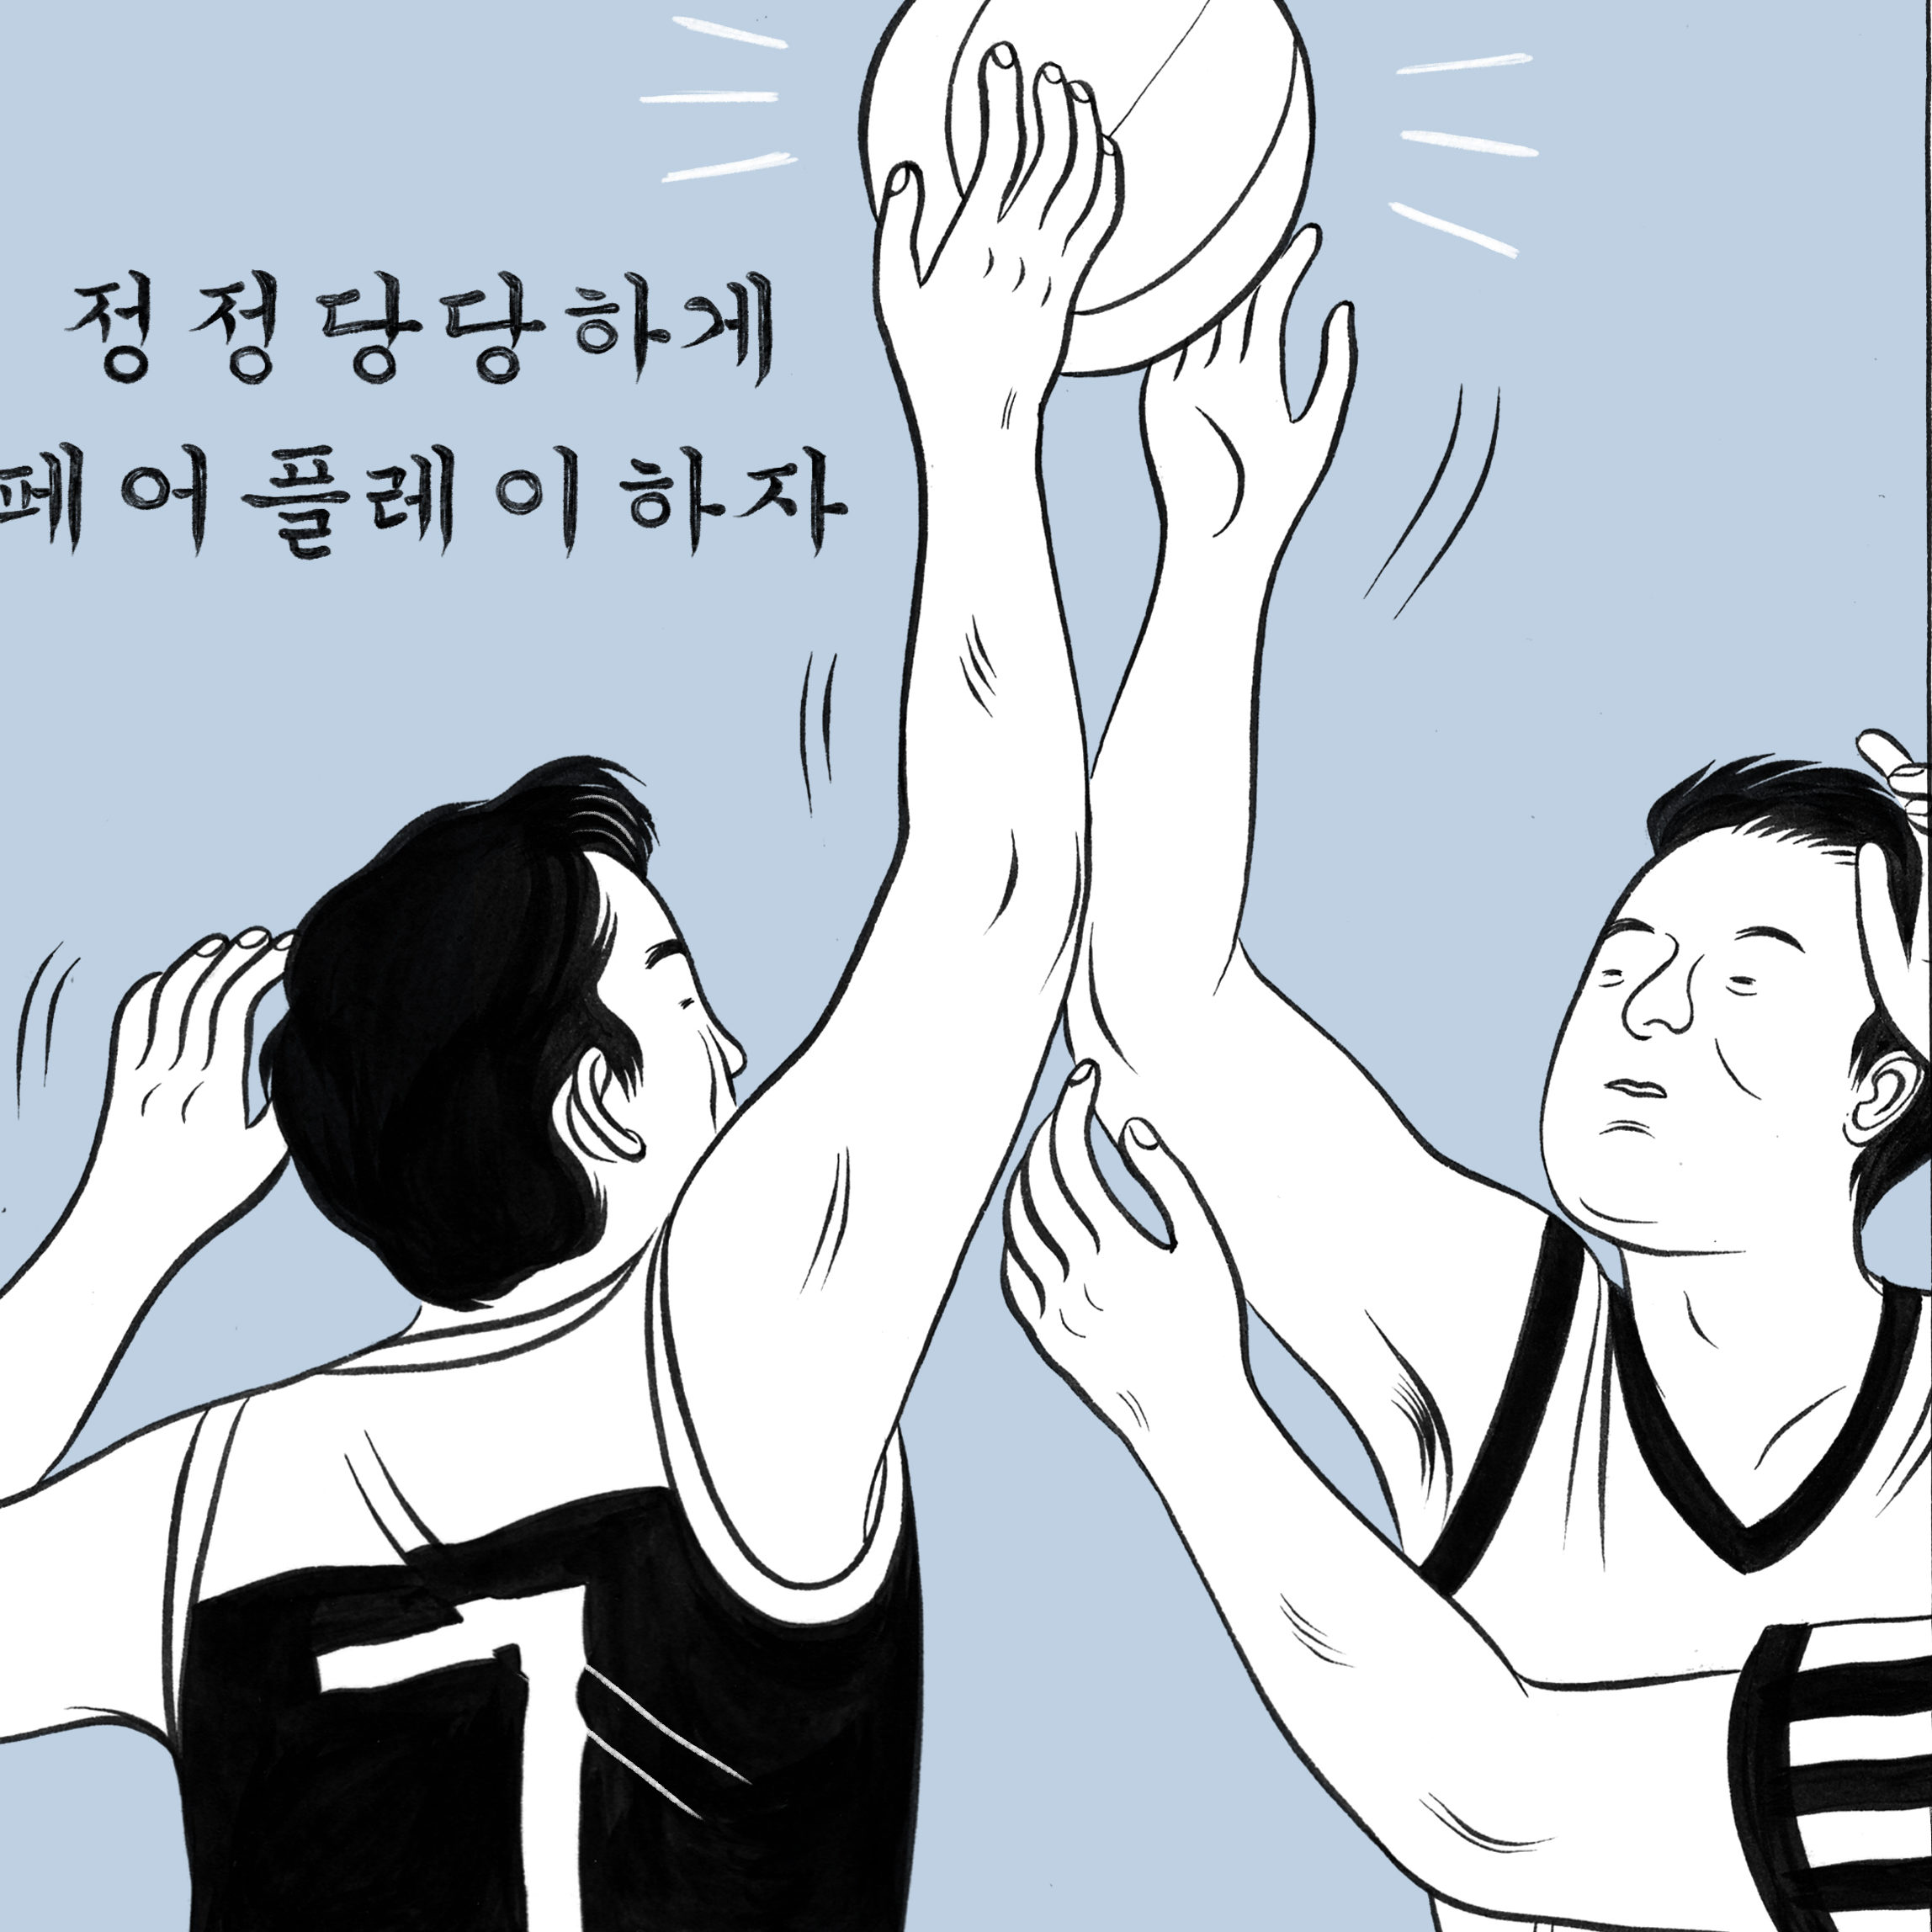 Comic-style illustration of Hobin reaching for a basketball at the same time as another basketball player.